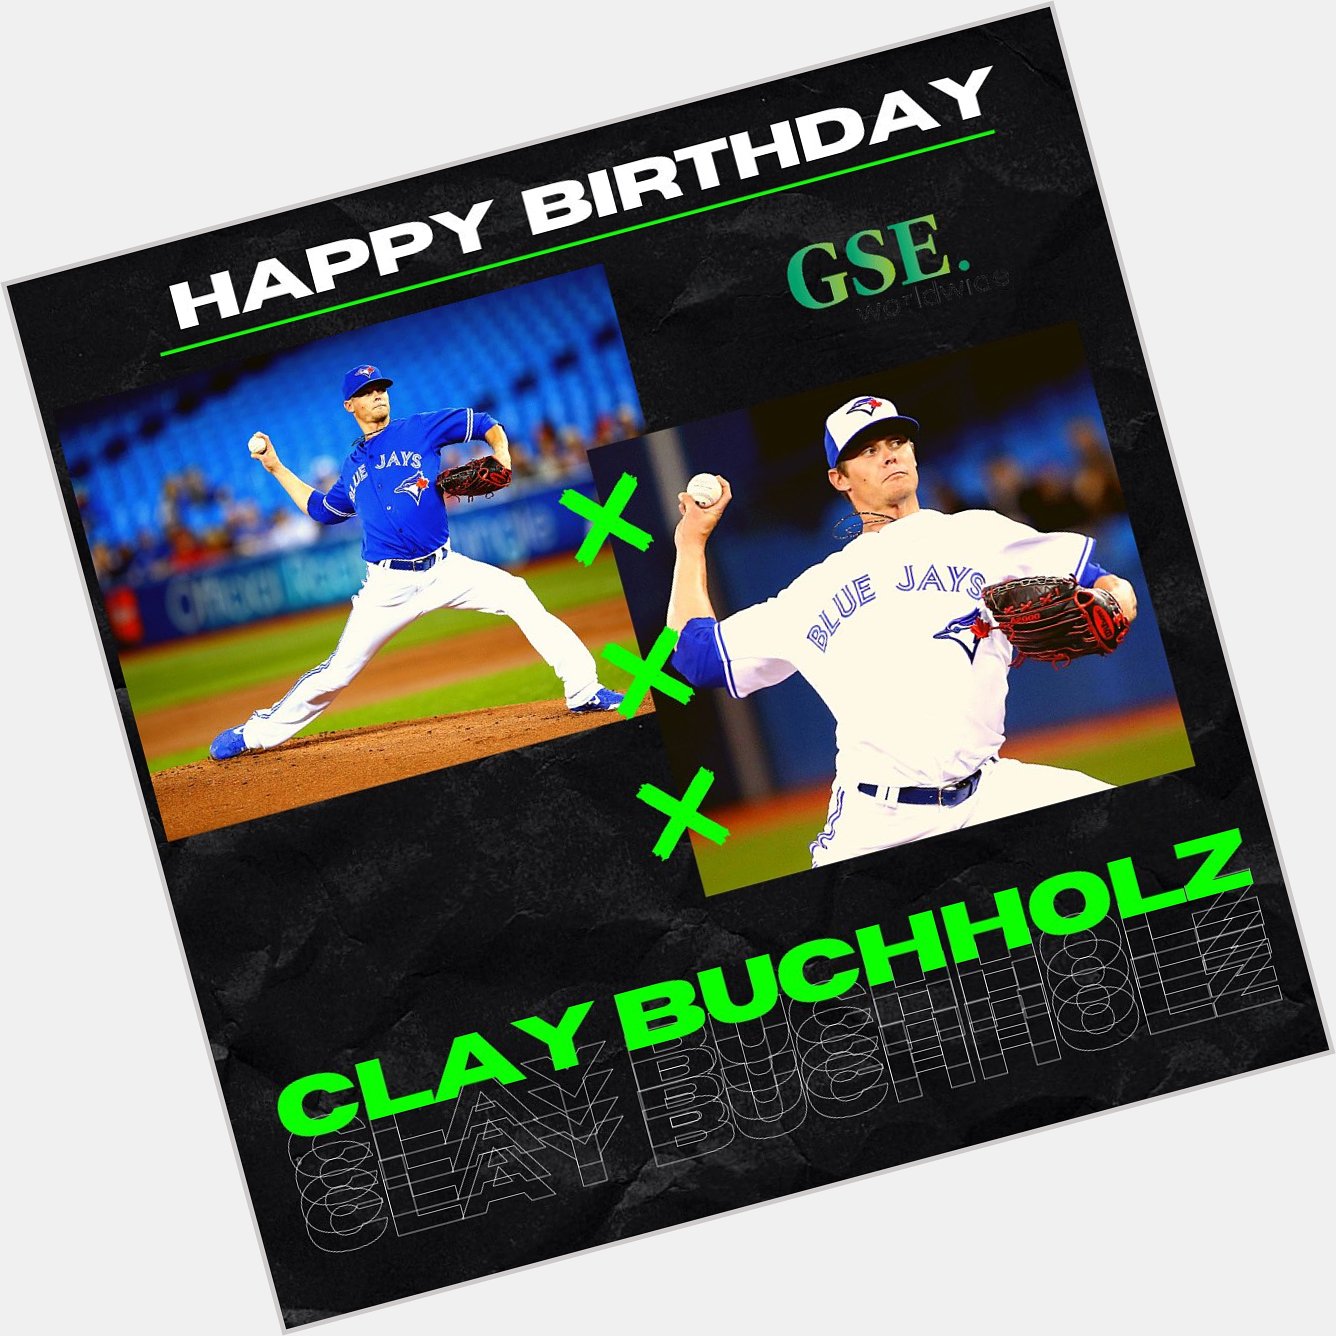 Wishing a Happy Birthday to Clay Buchholz from   